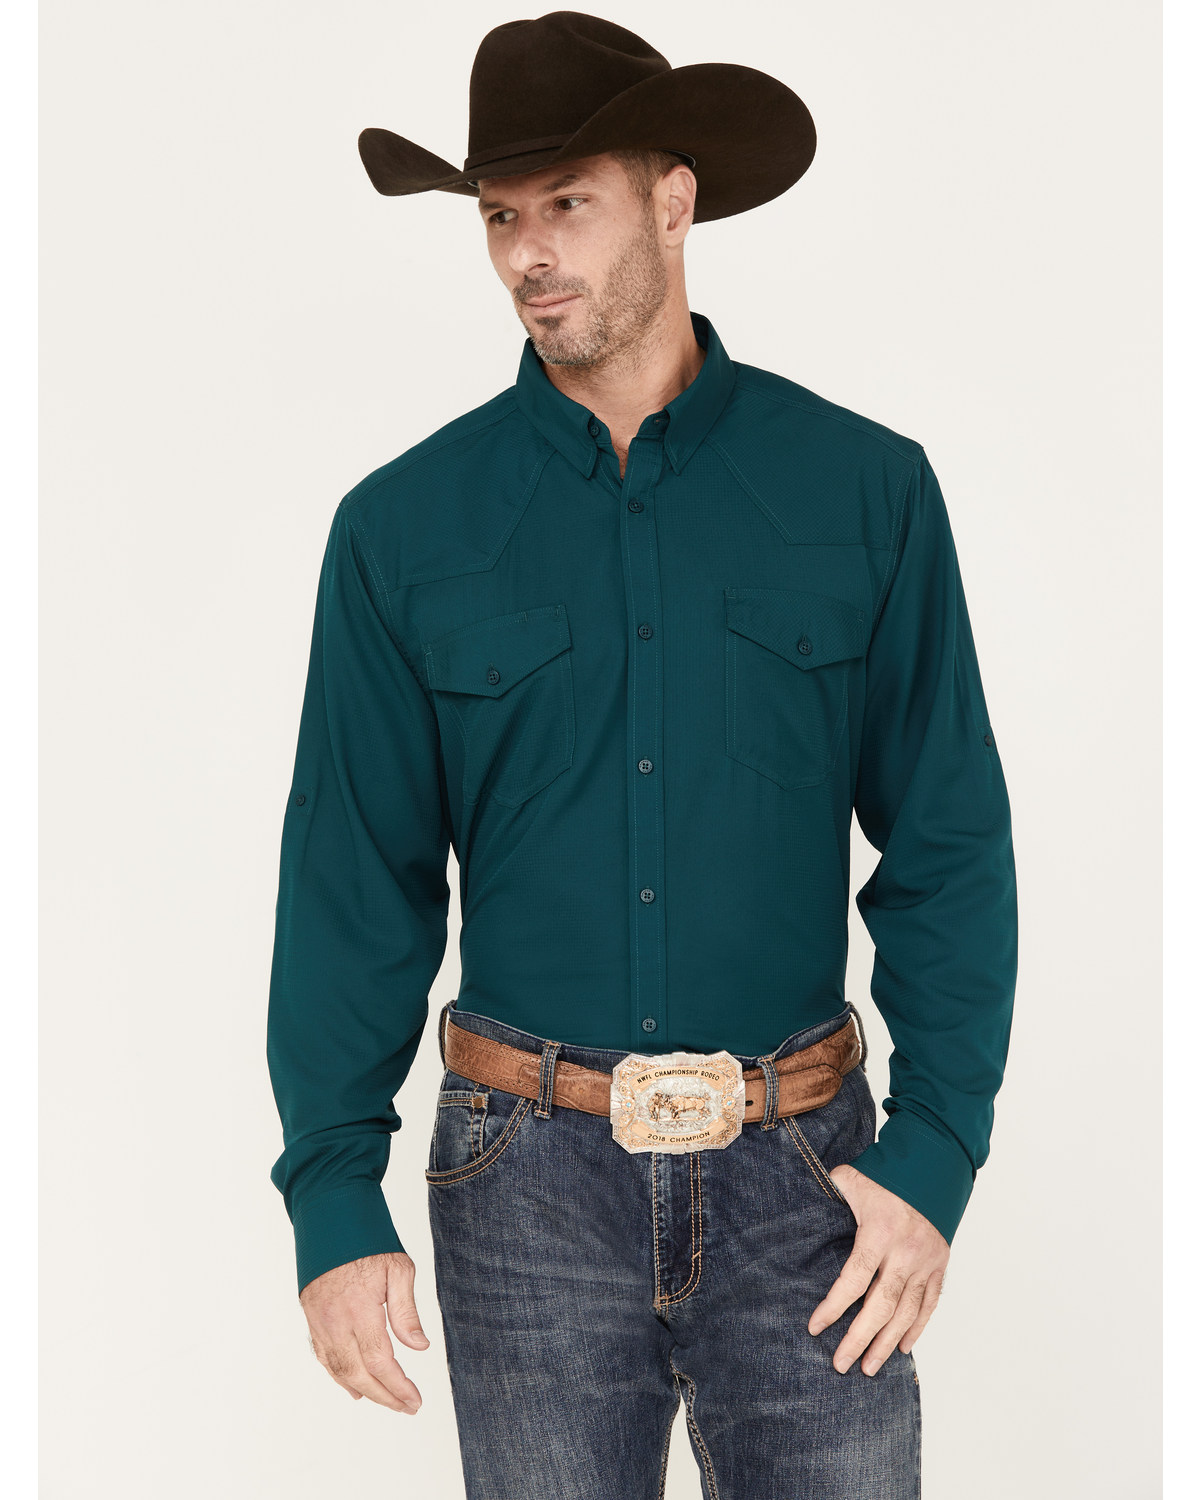 RANK 45® Men's Roughie Solid Long Sleeve Button-Down Western Performance Shirt